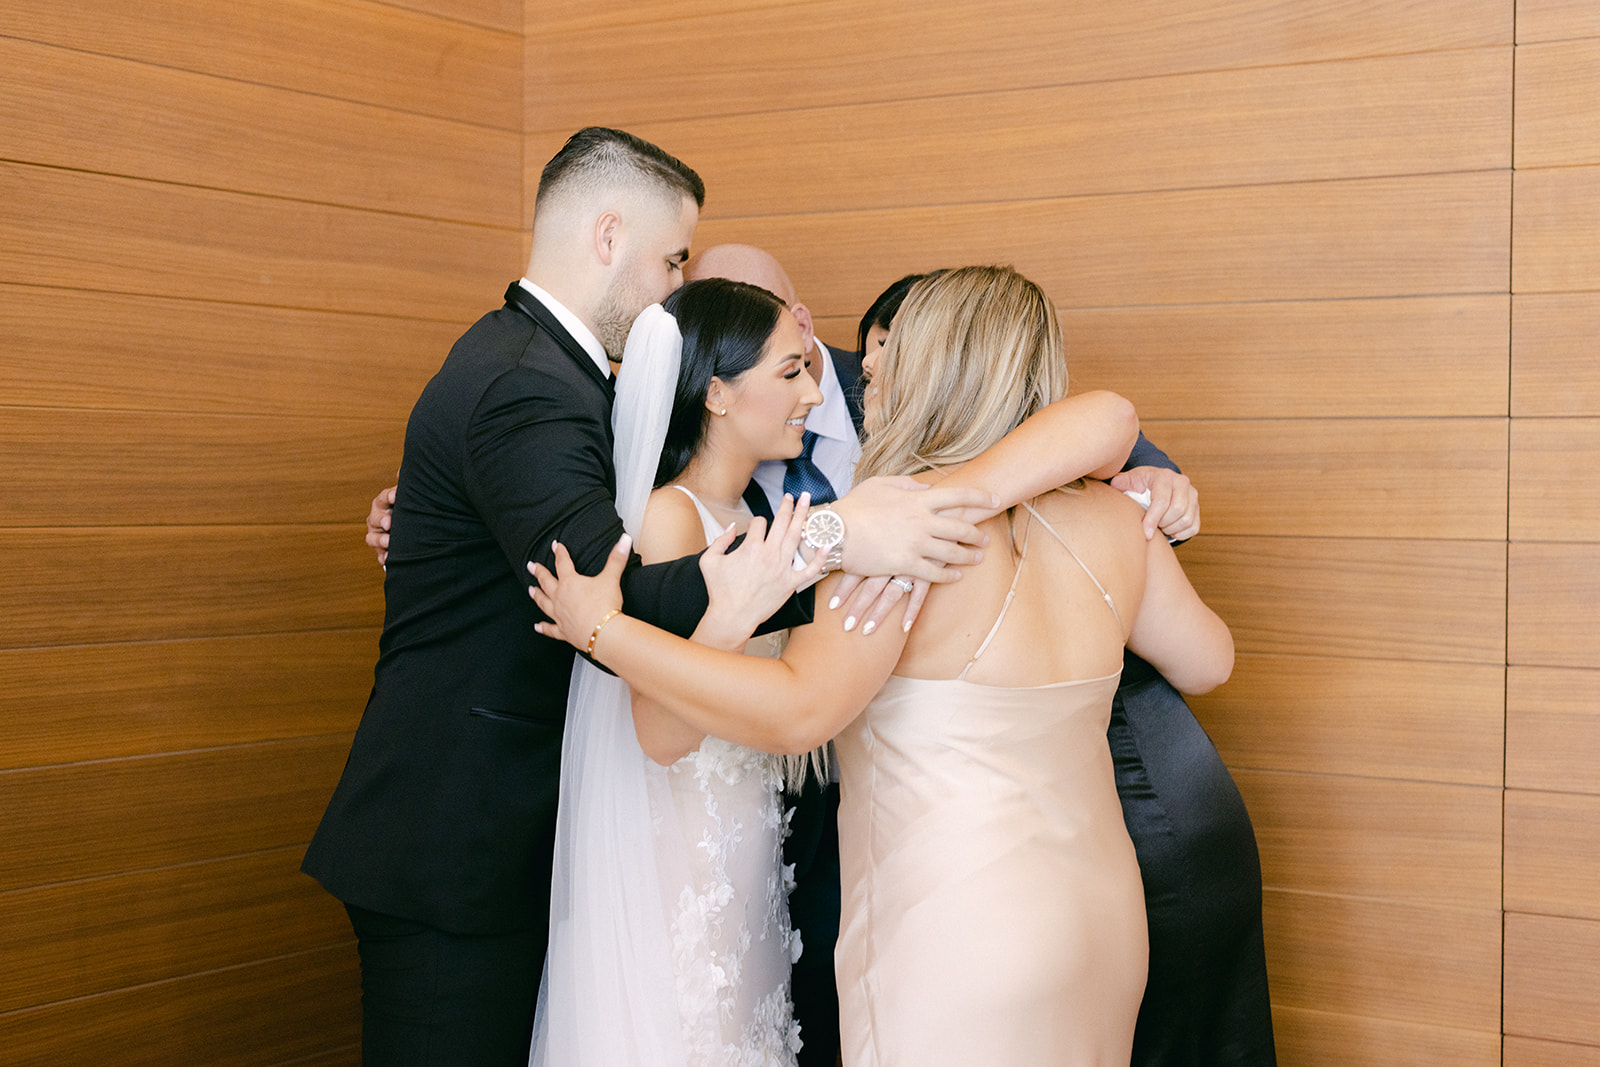 Group hug with family while getting ready for wedding 